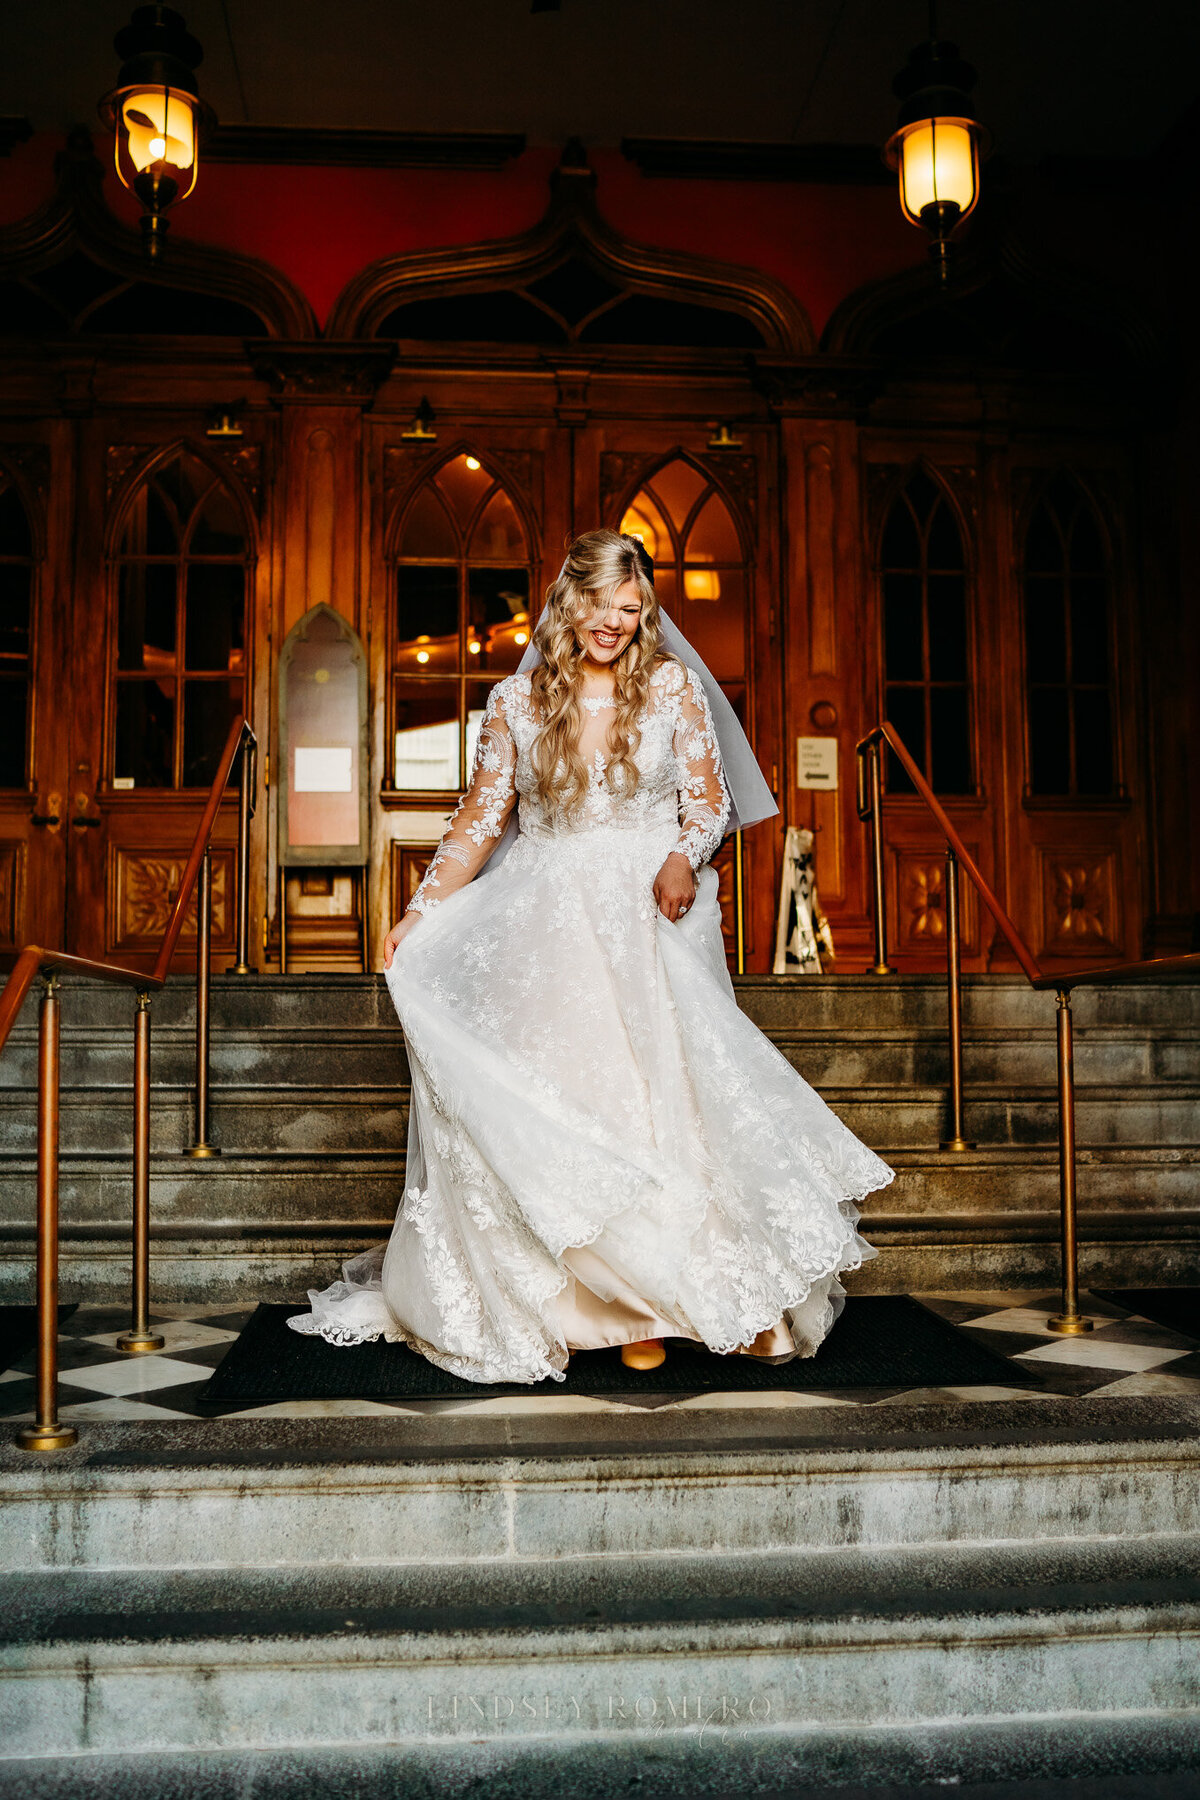 candid photo of bridal pose at old state capital in baton rouge, louisiana